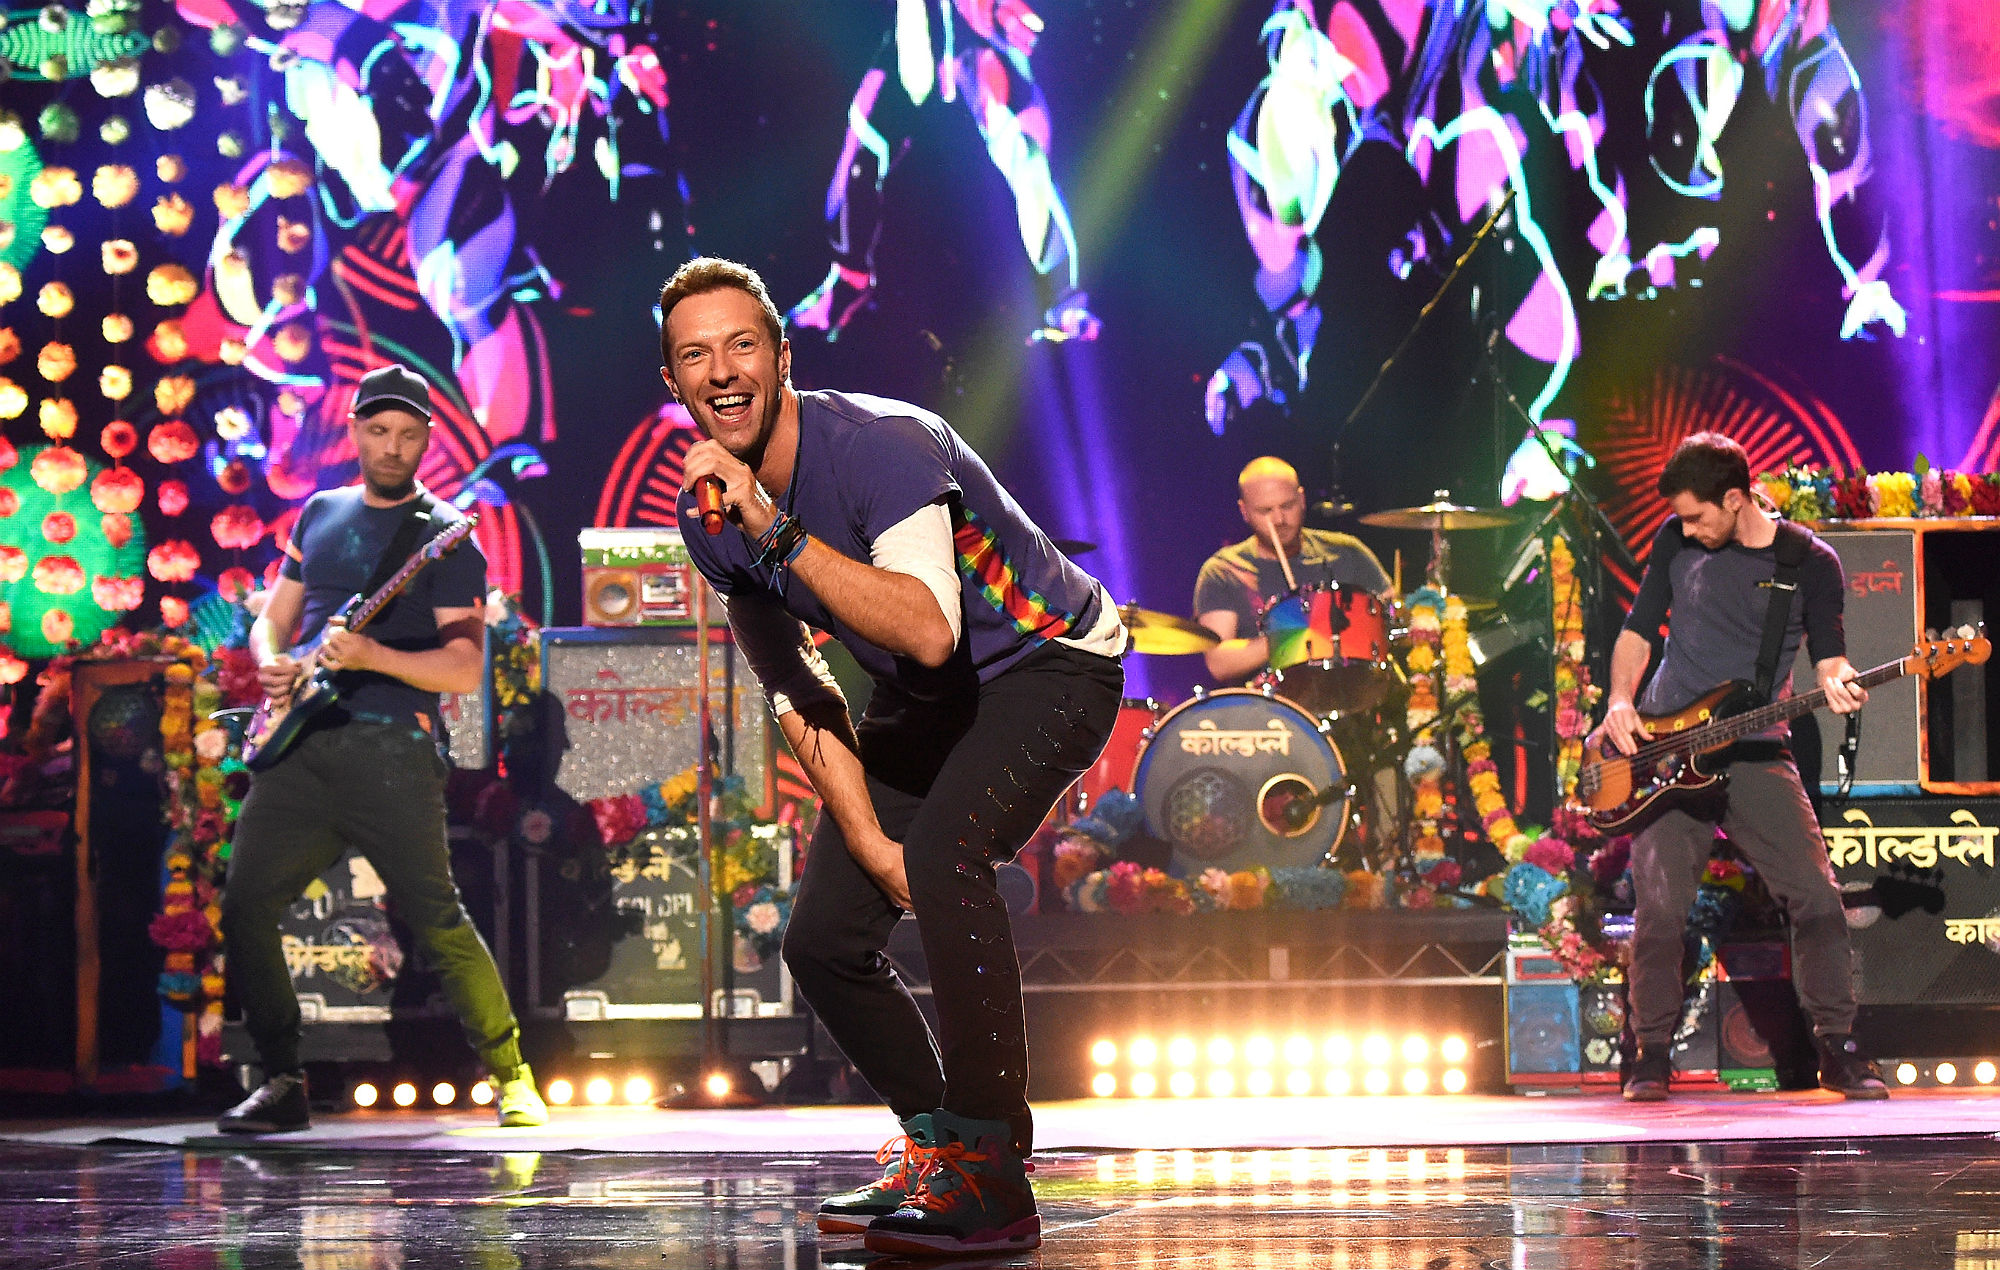 Coldplay performs a song from their A Head Full of Dreams album.